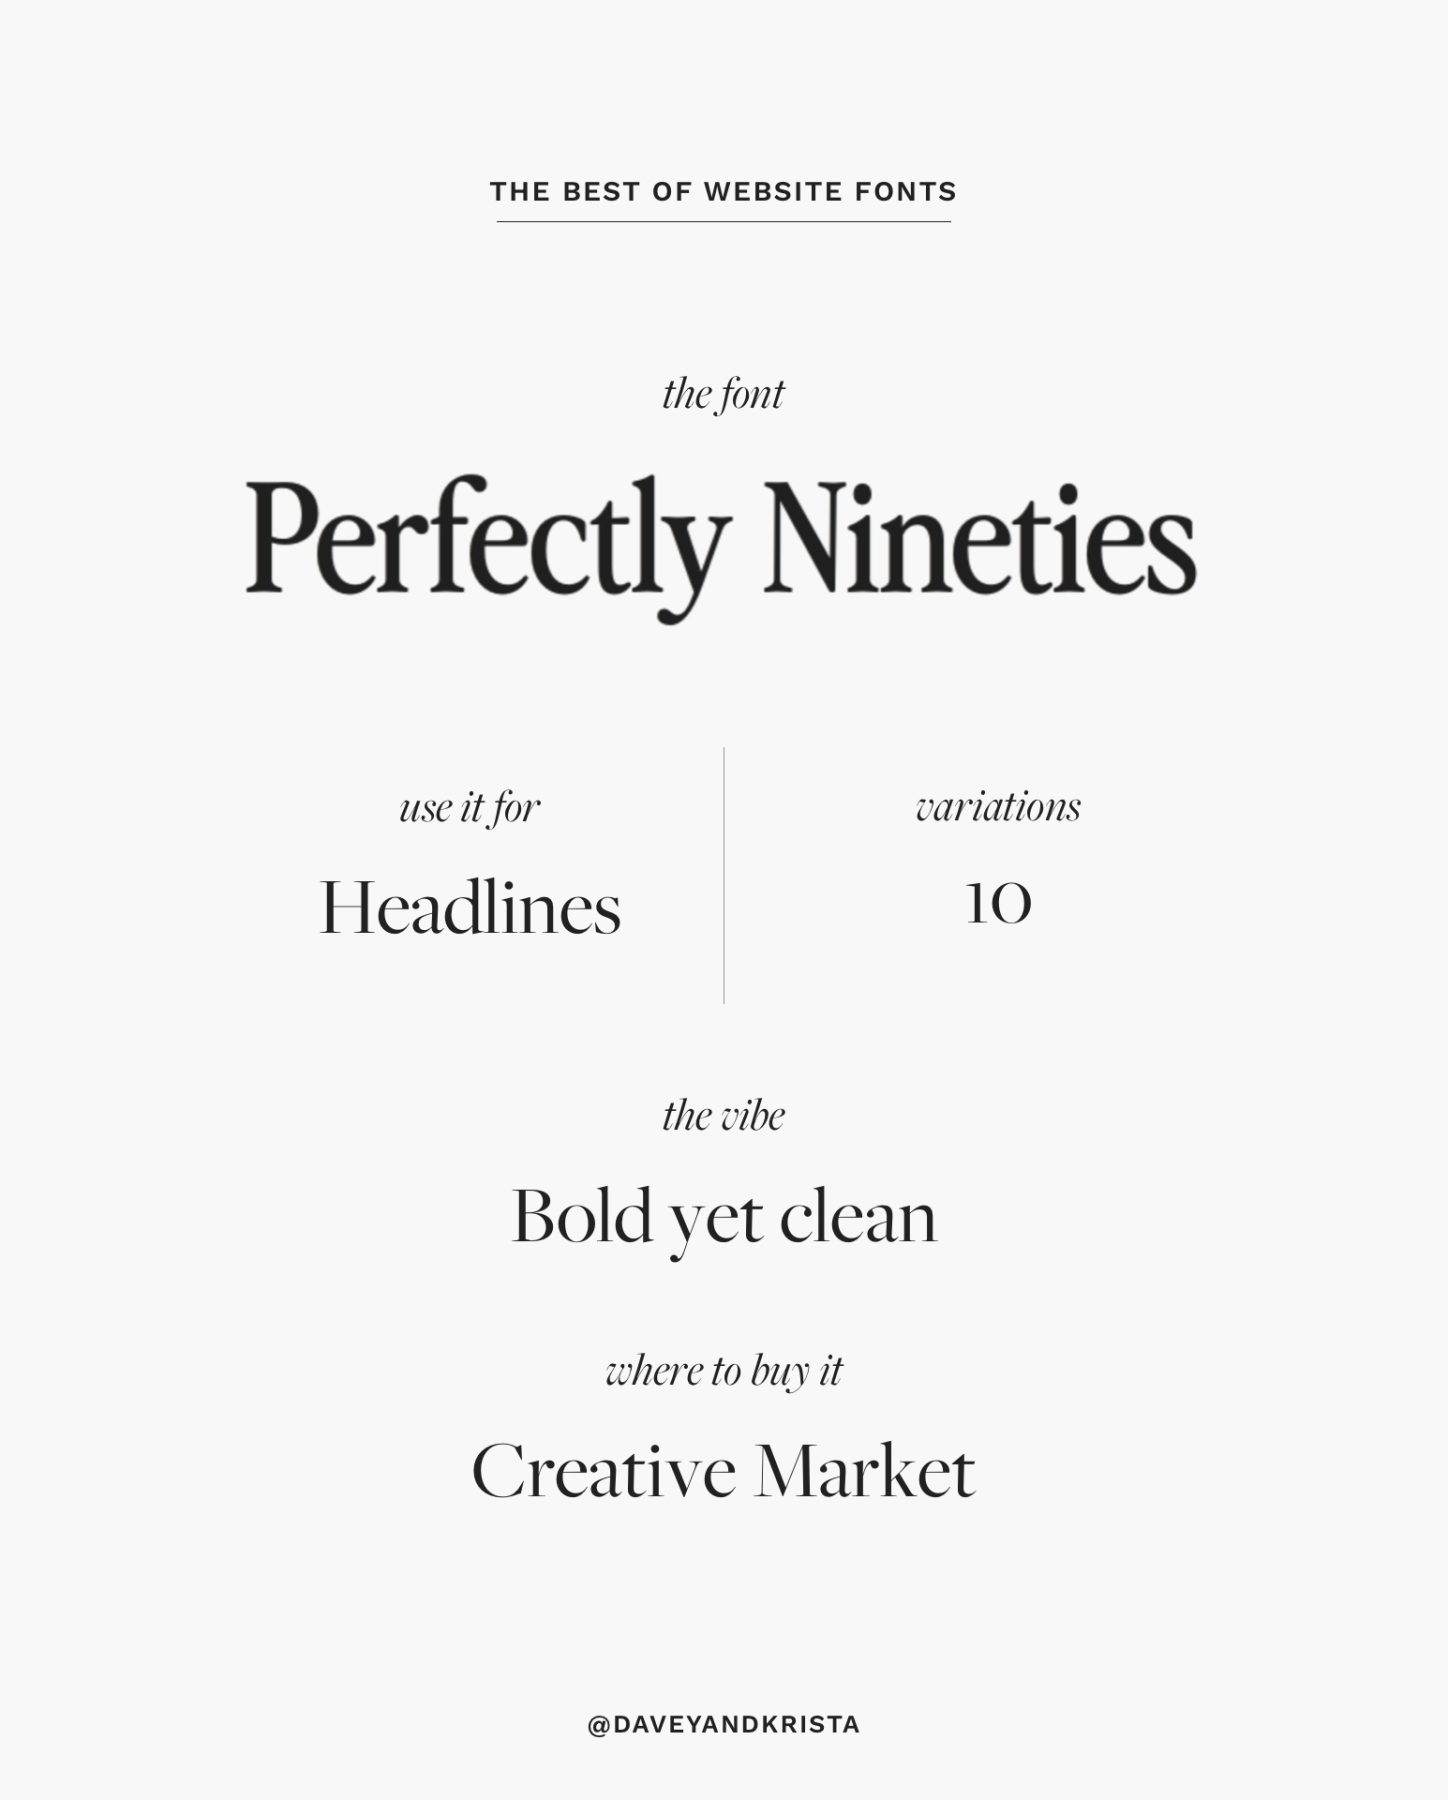 Trendy nineties-inspired website font: Perfectly Nineties | The Best Fonts for Websites